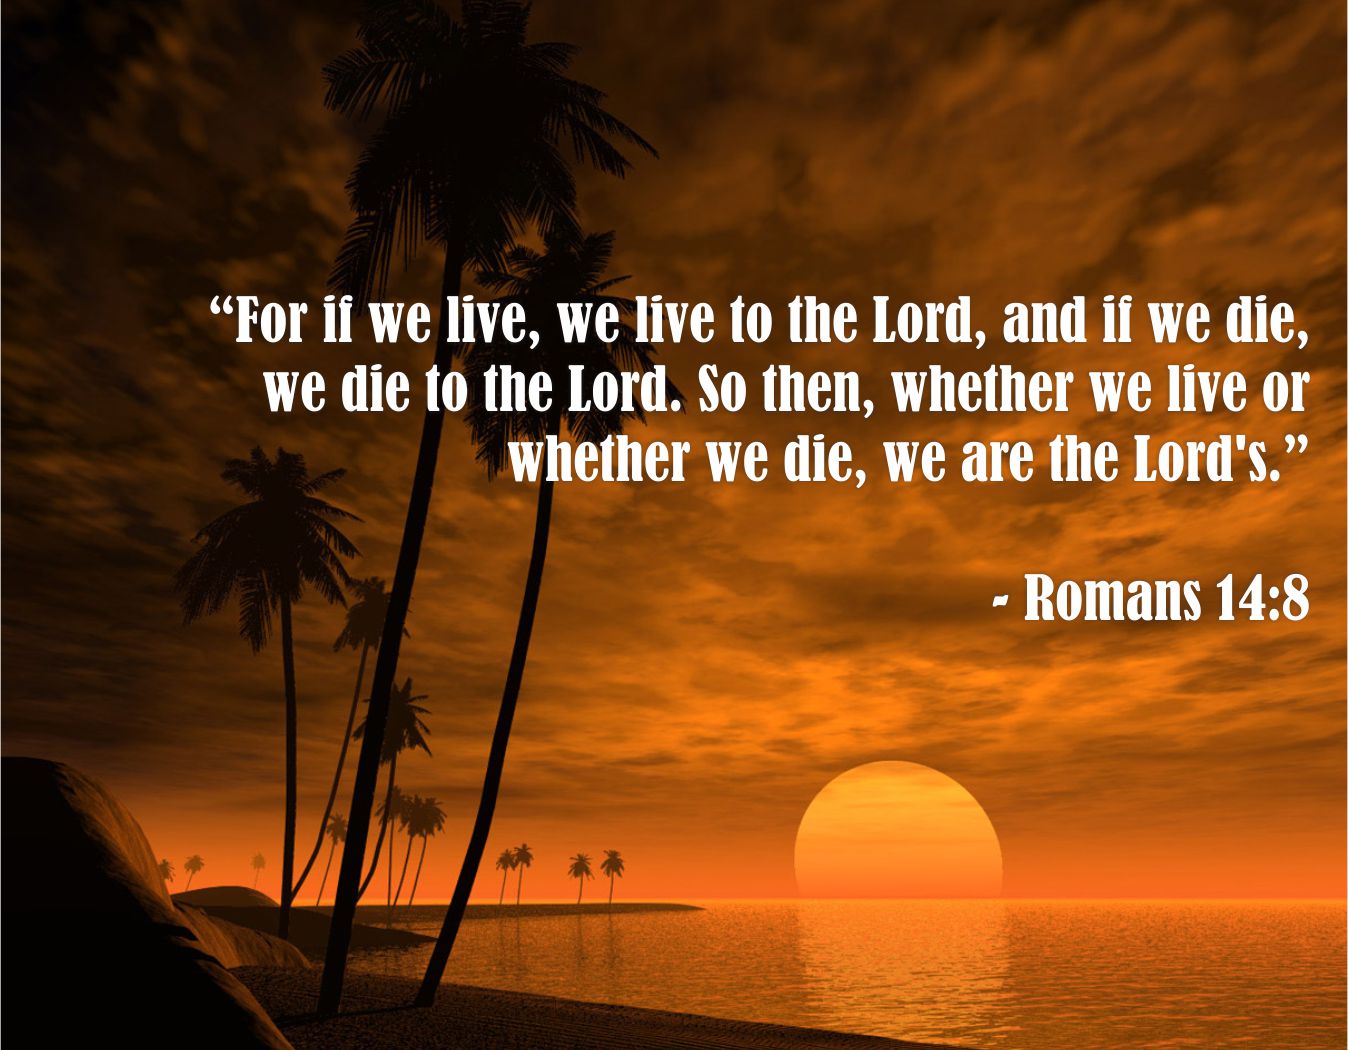 Bible Quotes On Death. QuotesGram